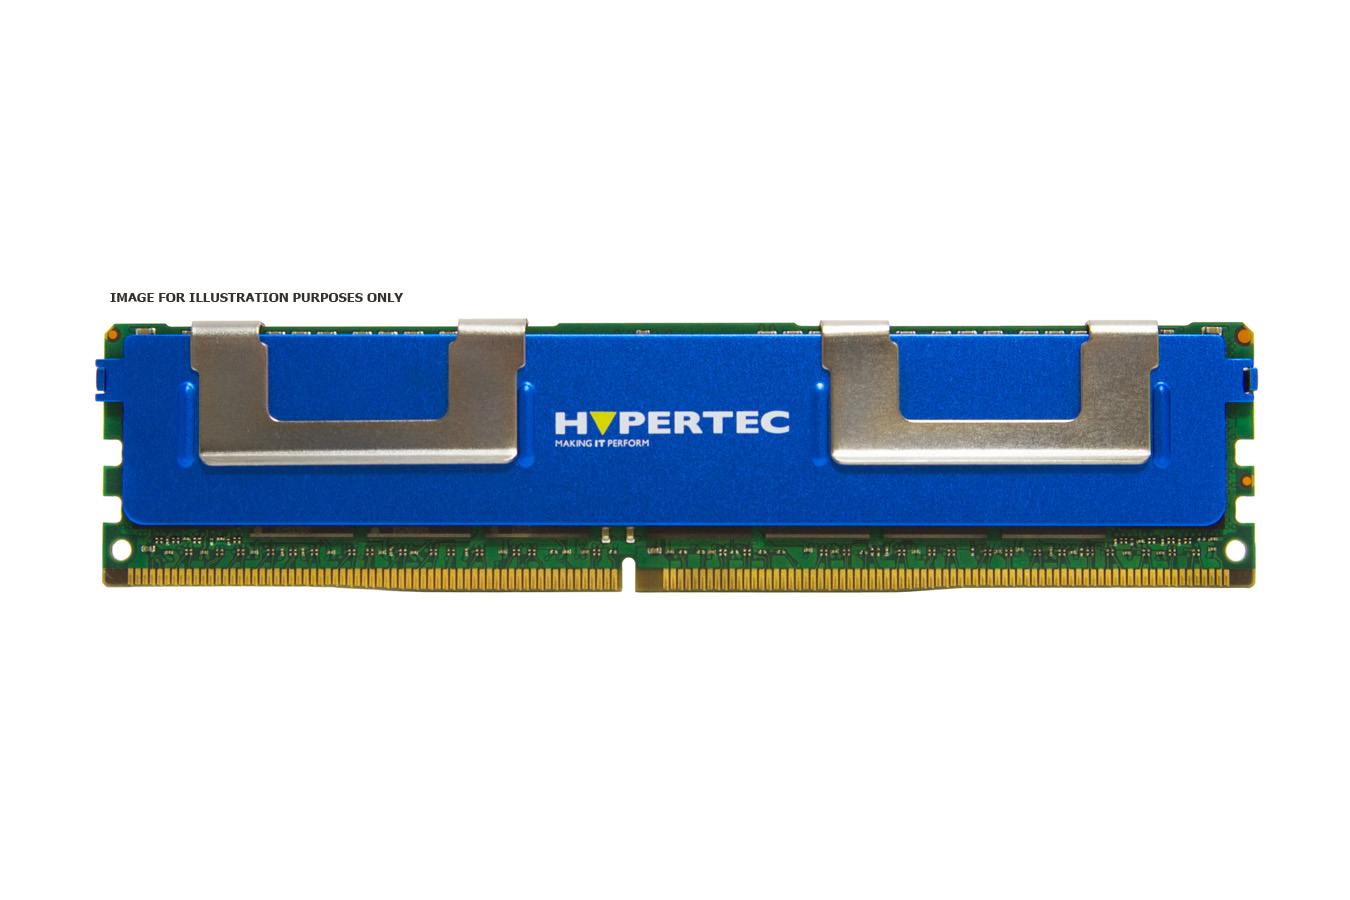 Photos - Other for Computer Hypertec A Lenovo equivalent 64 GB Quad rank - Load-Reduced ECC DDR4 S 46W 